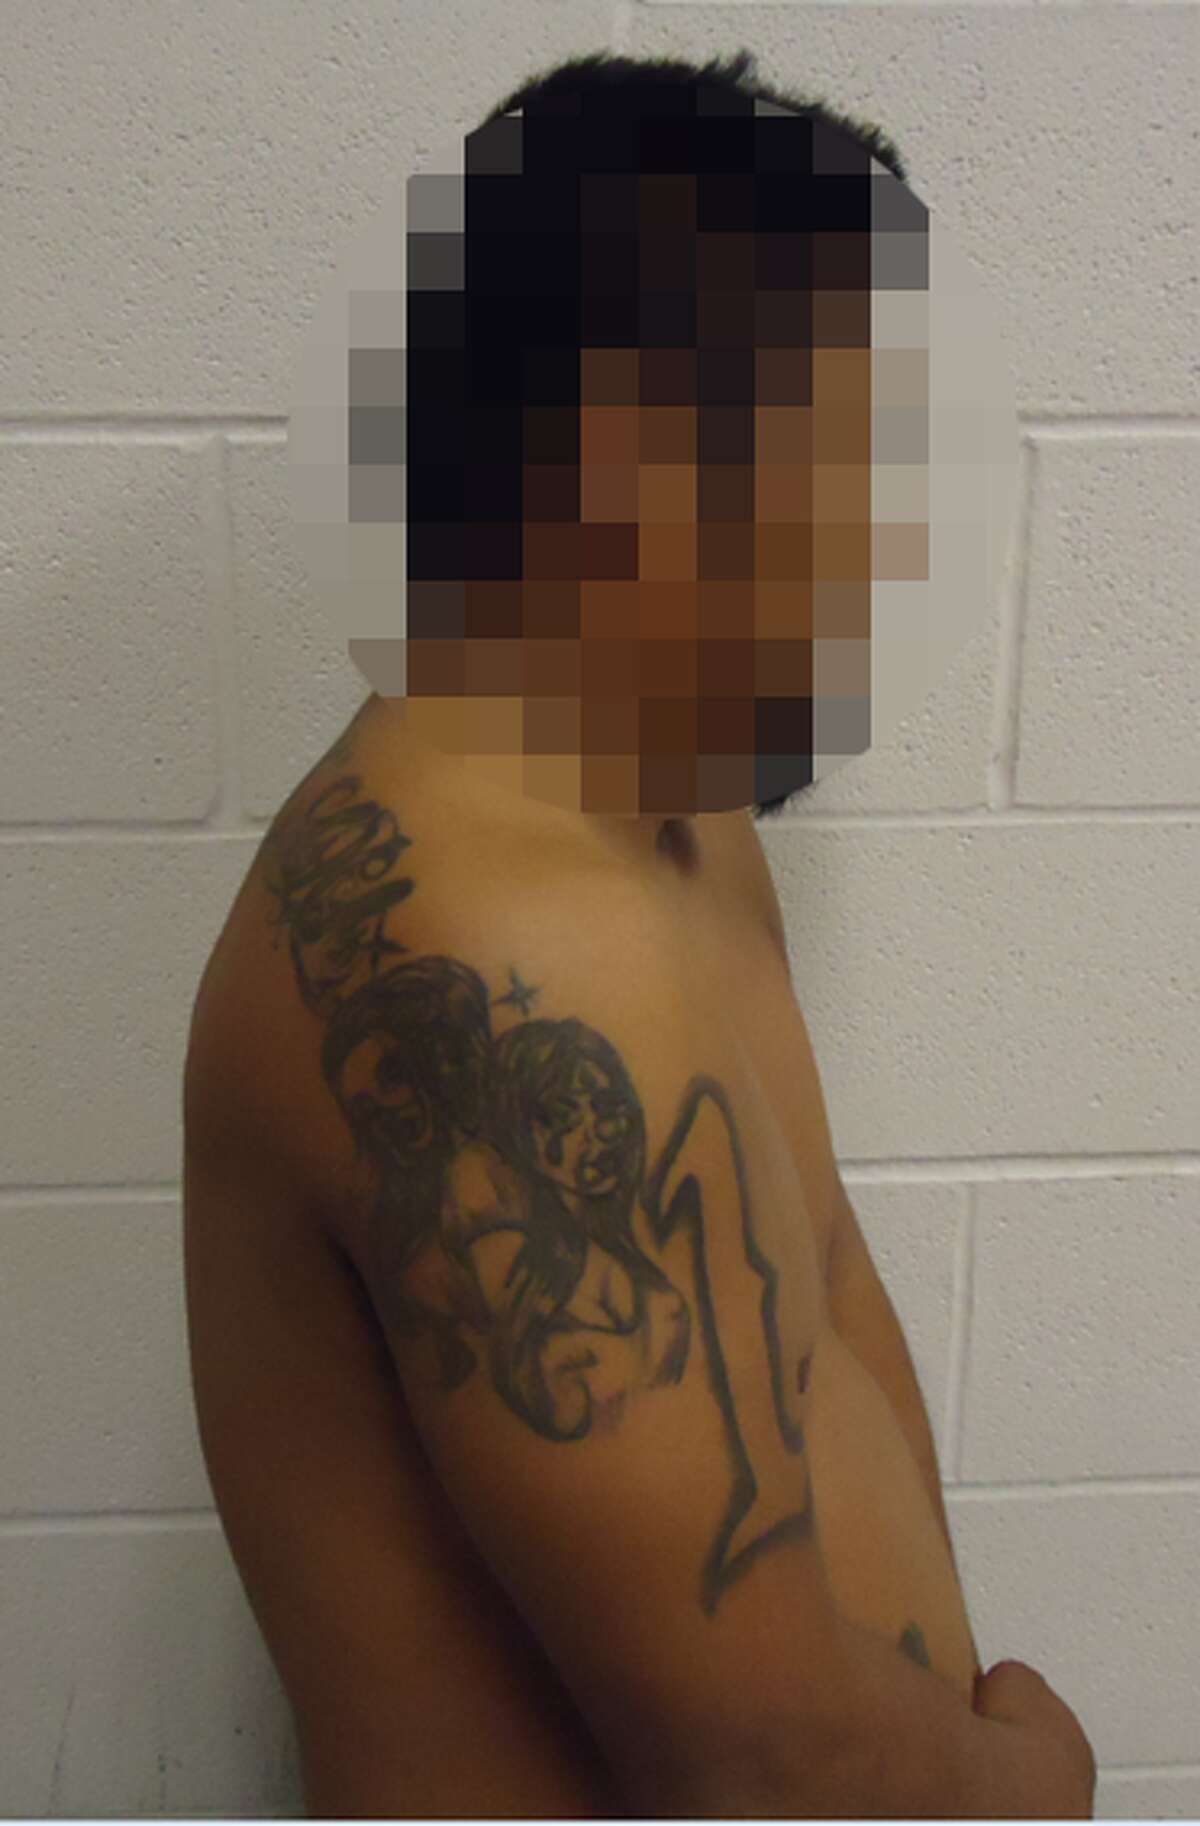 Agents apprehended documented MS-13 and 18th Street gang members over a four-day span in early July.